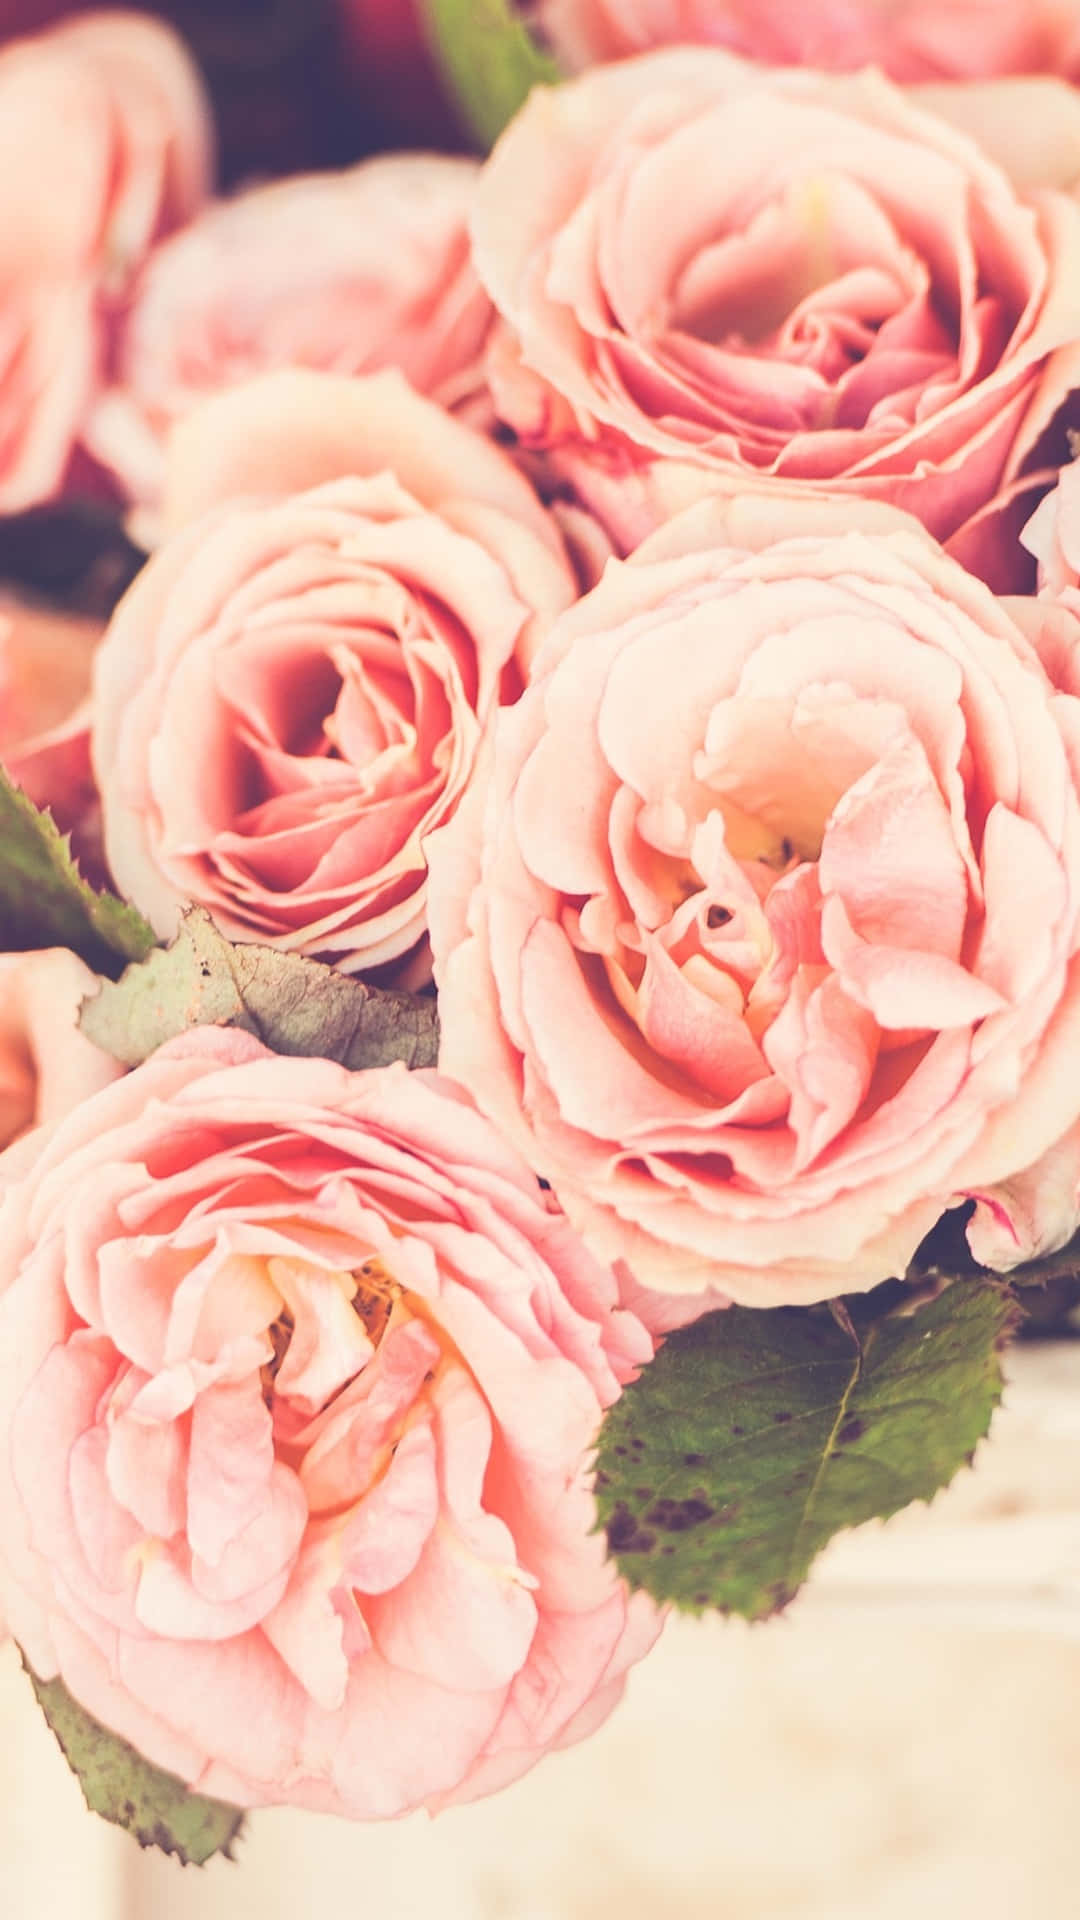 A Blooming Floral Design for your iPhone Wallpaper